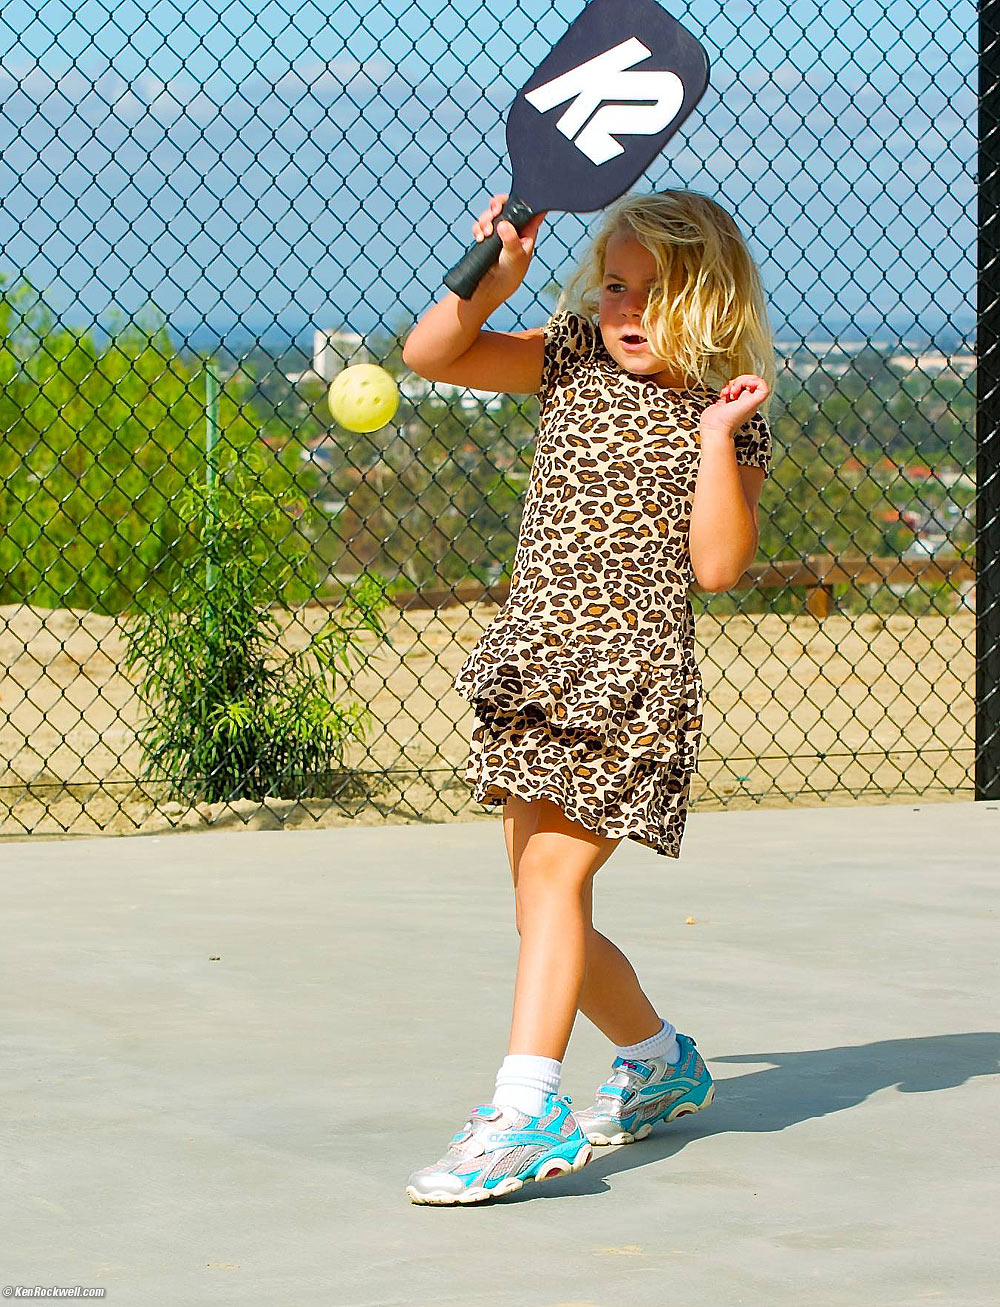 Katie tries out Noni's new pickleball court.